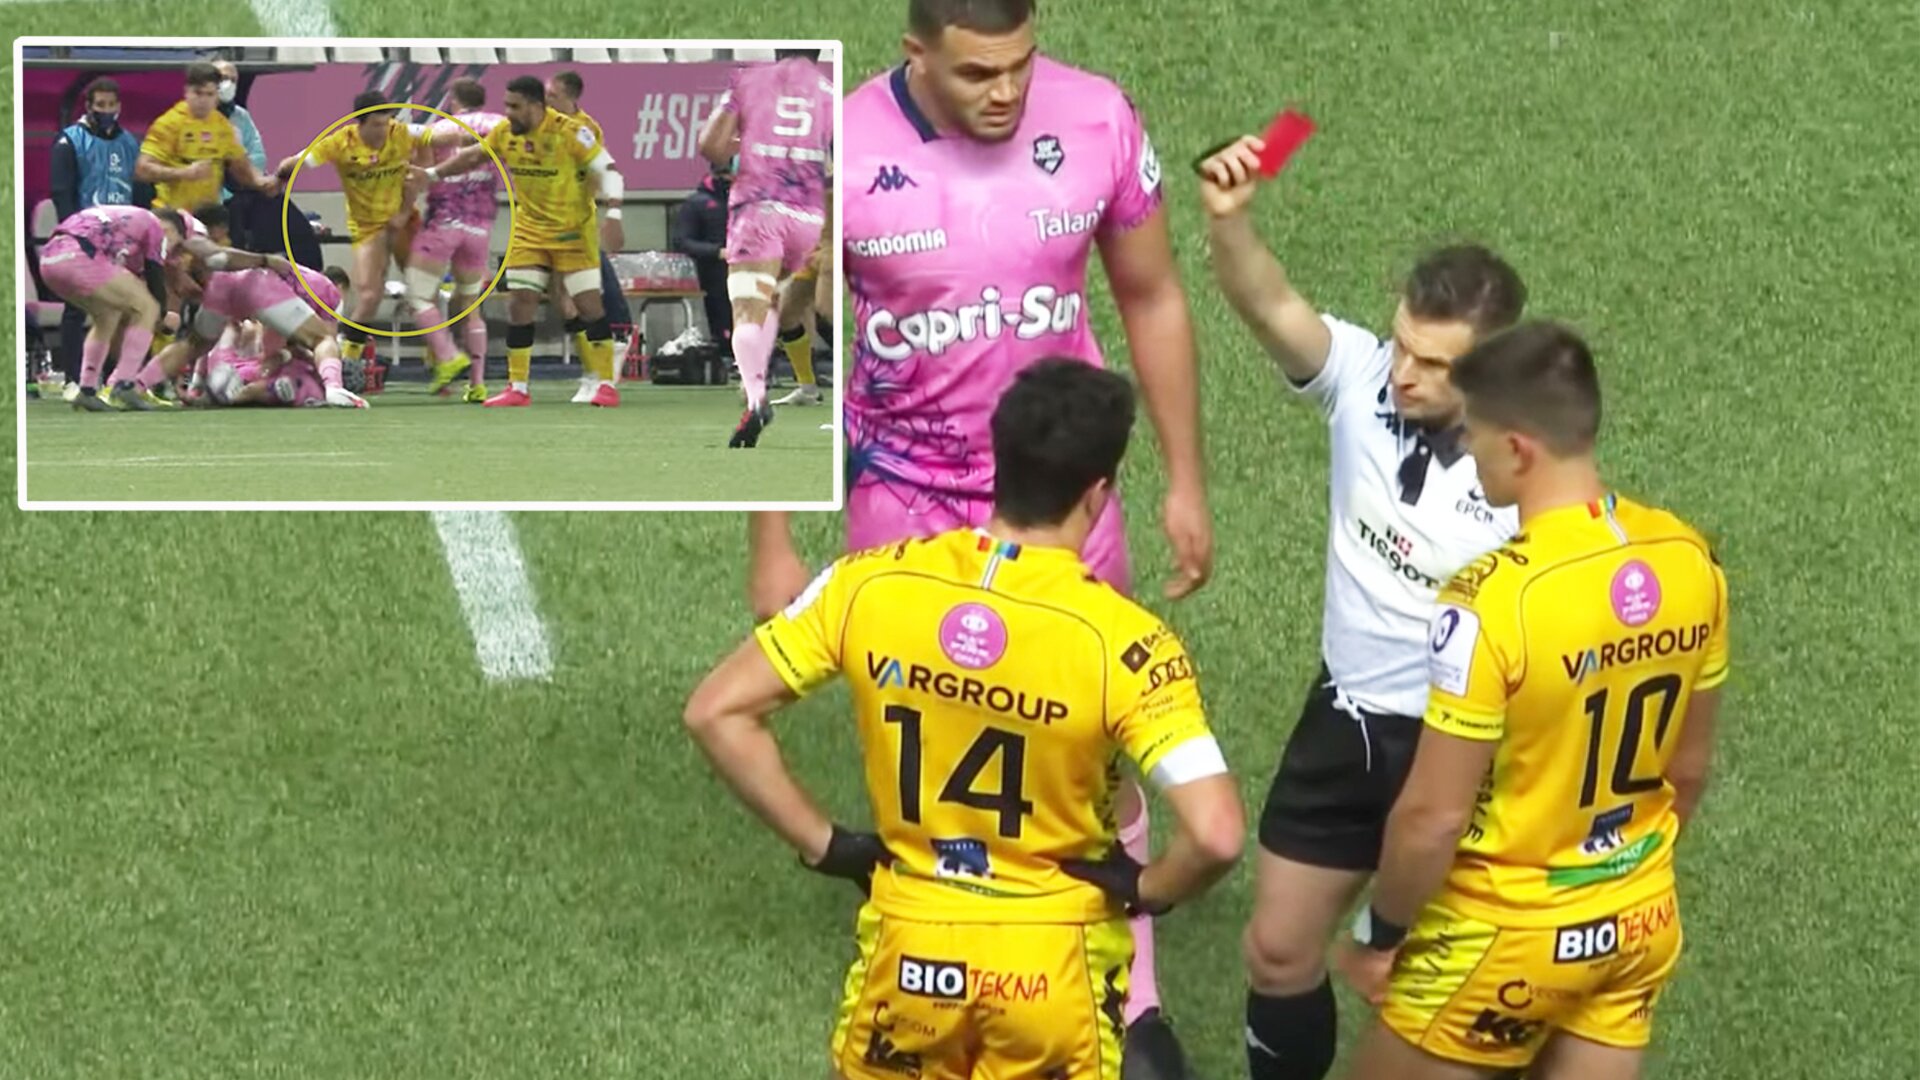 Two red cards shown after bizarre ball grabbing incident in European rugby clash